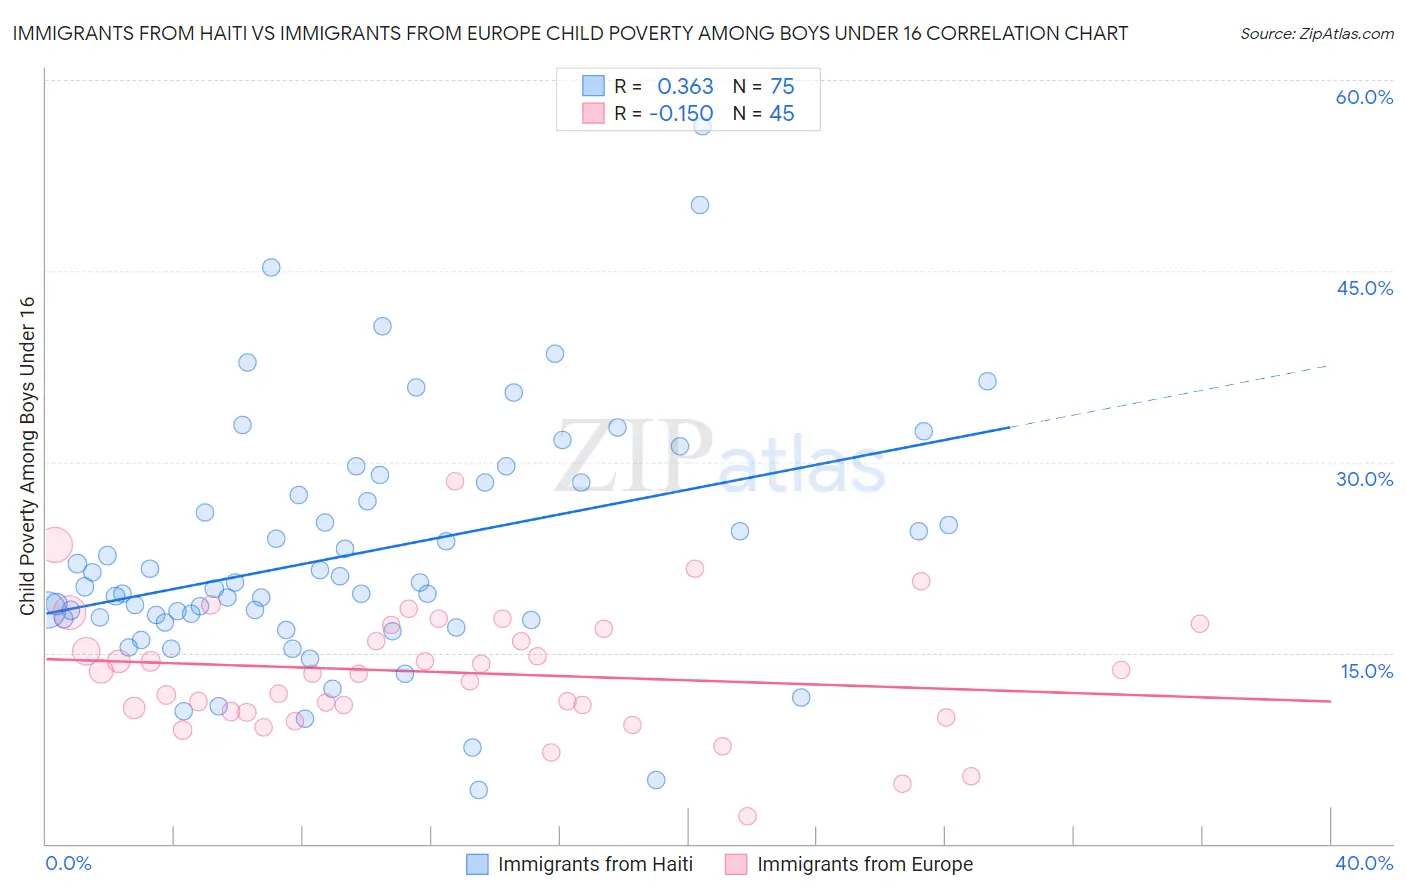 Immigrants from Haiti vs Immigrants from Europe Child Poverty Among Boys Under 16